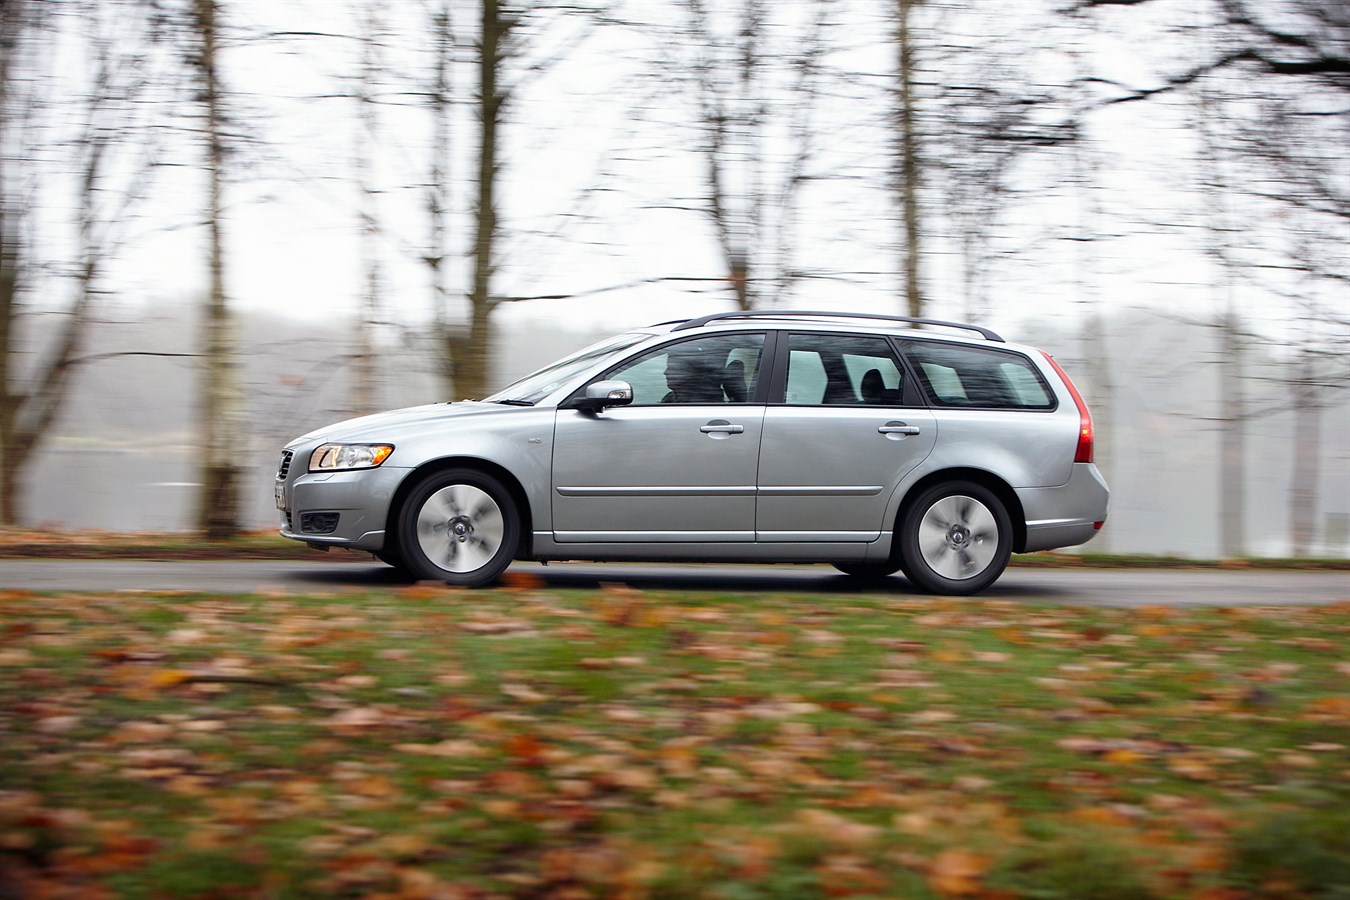 Volvo V50 1.6D DRIVe with Start/Stop